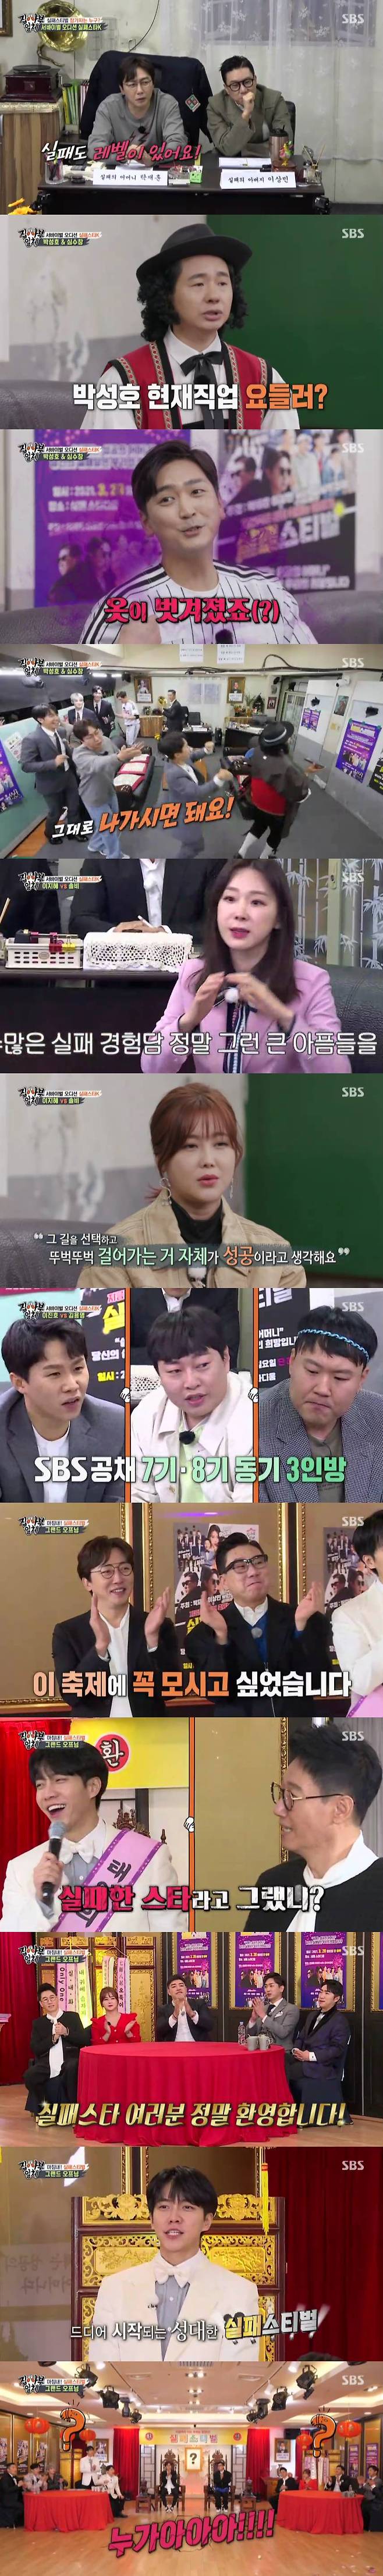 Lee Ji-hye, a group member, played a stone fastball because of the teams disbanding because of Seo Ji-young Lee Ji-hye appeared on SBS entertainment program All The Butlers on the 21st and made the hash listeners laugh, disbanding is due to Seo Ji-youngThe broadcast was decorated with Failure Festival with Master Tak Jae-hun and Lee Sang-min.Failure Festival is a festival that supports and supports Failure. It is a large project of All The Butlers designed to reinterpret the meaning of Failure.Baseball player Shim Soo-chang and comedian Park Sung-ho threw the ticket to the Failure Festival, which Park Sung-ho tasted enough to taste Failure.I have no place to back down, said Park Sung-ho, who is currently working as a yodeler, saying, My dream is to enter Switzerland or Europe.But I can not go abroad because of Corona. Shim Soo-chang then confessed: Its not retirement, its clothes stripped off, its not retirement on its own, adding: Athletes usually do a grand retirement ceremony.I did not have a retirement ceremony, and my friends gave me a retirement ceremony at a small house. His application was filled with various Failures such as Major League Baseball, attention, entertainment, catcher Jo In-sung and reconciliation, and health control Failure.Lee Ji-hye and Solbi also proudly challenged the Failure Stival, which Solbi said: As soon as I heard about the Failure Stival, I really wanted to support it.I have a story that grew up from Failure. Solbi said that the group Typhoon was Failure because of the company.There may be my cause, but then the company went bankrupt. Lee Ji-hye also mentioned disbanding; Tak Jae-hun said, I think this is what I was woven into.Who will blame you? Lee Ji-hye said, Thats because of Seo Ji-young Immediately Lee Ji-hye added: Its a joke thats funny.They also spoke on the phone with the applicant who sent the Failure story.In the story of Failure, who has been an unknown actor for seven years, Solbi said, I always have a gaze around me, Why do you do art?I think it is a success to choose the path and walk away from the path, he said. Everything is uncertain and uncertain. If I love the job and my reasons are clear, I think my life has succeeded even if it is not a social success. I think so. The last applicants were comedian Lee Jin-ho and Kim Yong-nam.Kim Yong-myeong talked about the second plan Failure, hair thinning Failure, and Lee Jin-ho recently made the scene into a laughing sea by telling Failure that he had Failure in Talk on Radio Star.Kim Yong-myeong then answered What is Failure? Failure is a stepping stone to move forward. Lee Jin-ho also responded that Failure is a rehearsal for success and received applause from members.Failure Star Top 5 was selected by comedian Ji Seok-jin, Jang Dong-min, and Judo players Kim Min-soo, Shim Soo-chang and Solbi who lost one testicle in the last broadcast.Lee Seung-gi declared, I will hold the Failure Festival in earnest. At the same time, someone shouted Who and interrupted the opening ceremony.In the preliminary video, it was revealed that one person who gives laughter and hope to 6,000 Failure people will be selected as Failure King.All The Butlers is broadcast every Sunday at 6:25 pm.=